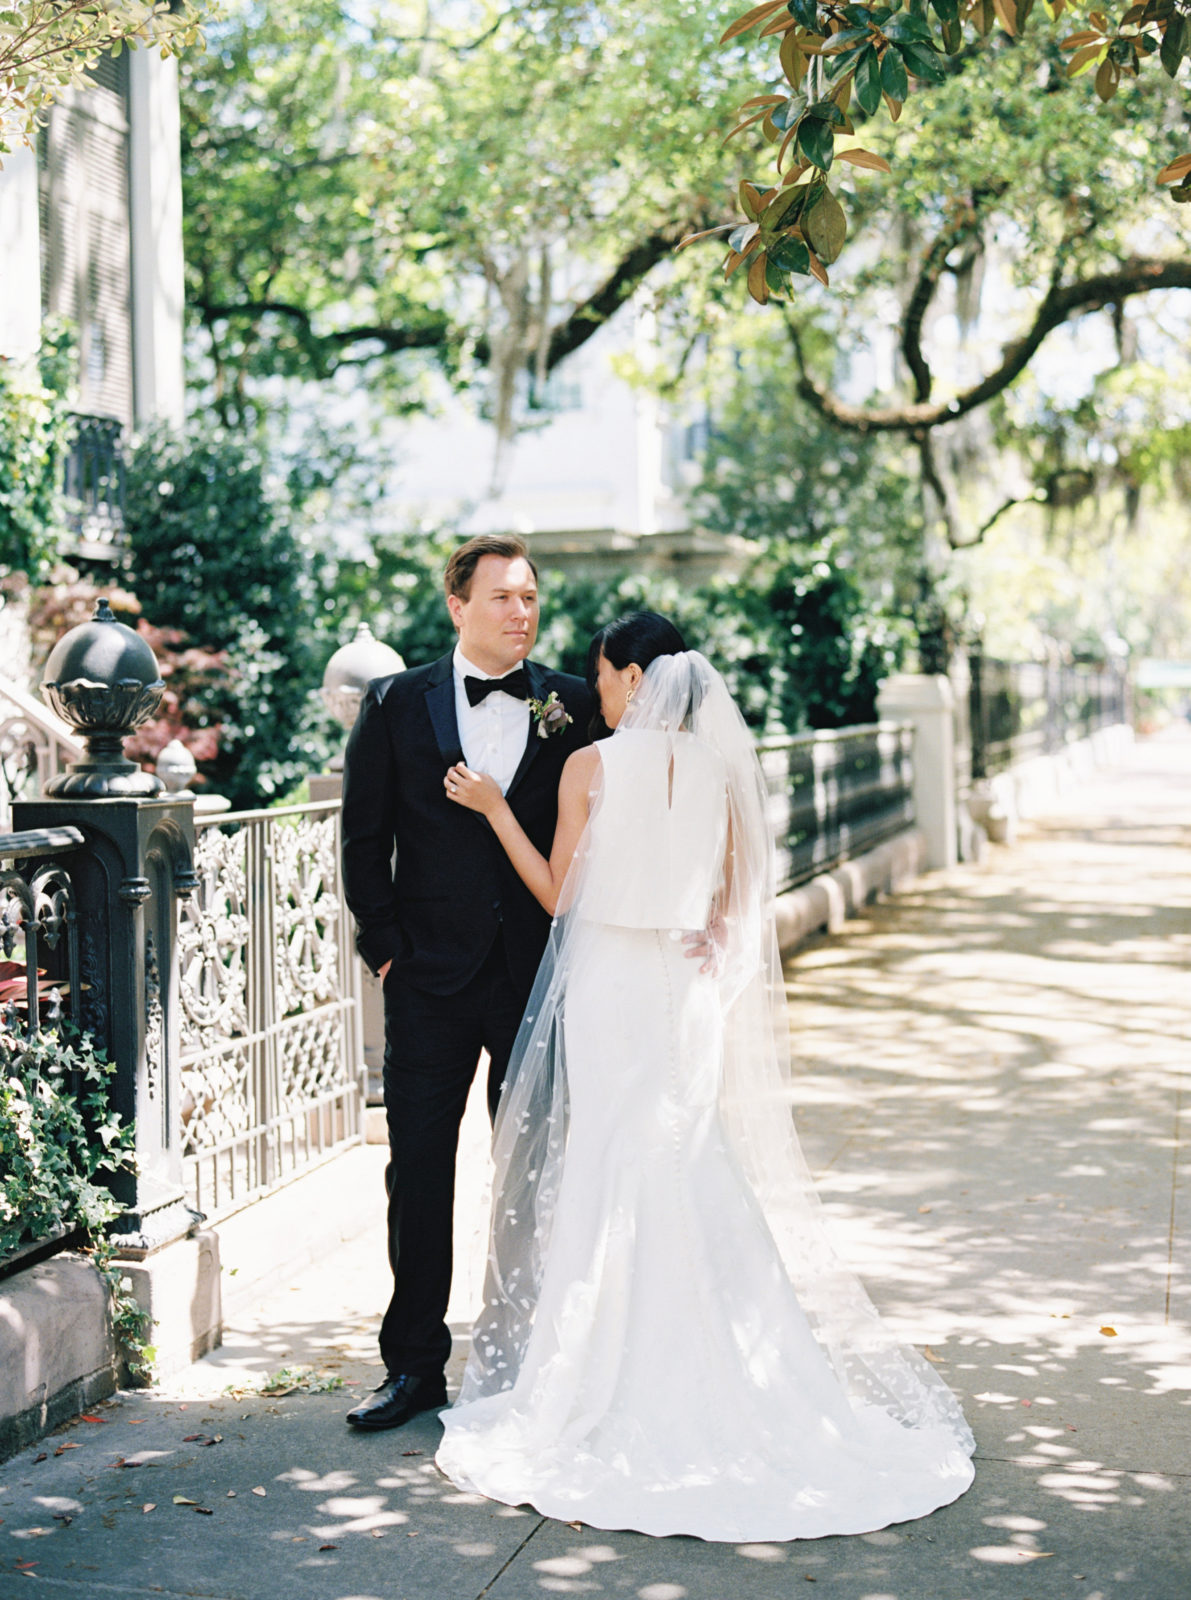 Groom holds bride's waist while bride nuzzles into groom on a sunny street in Savannah, Georgia. Old world-inspired elopement.